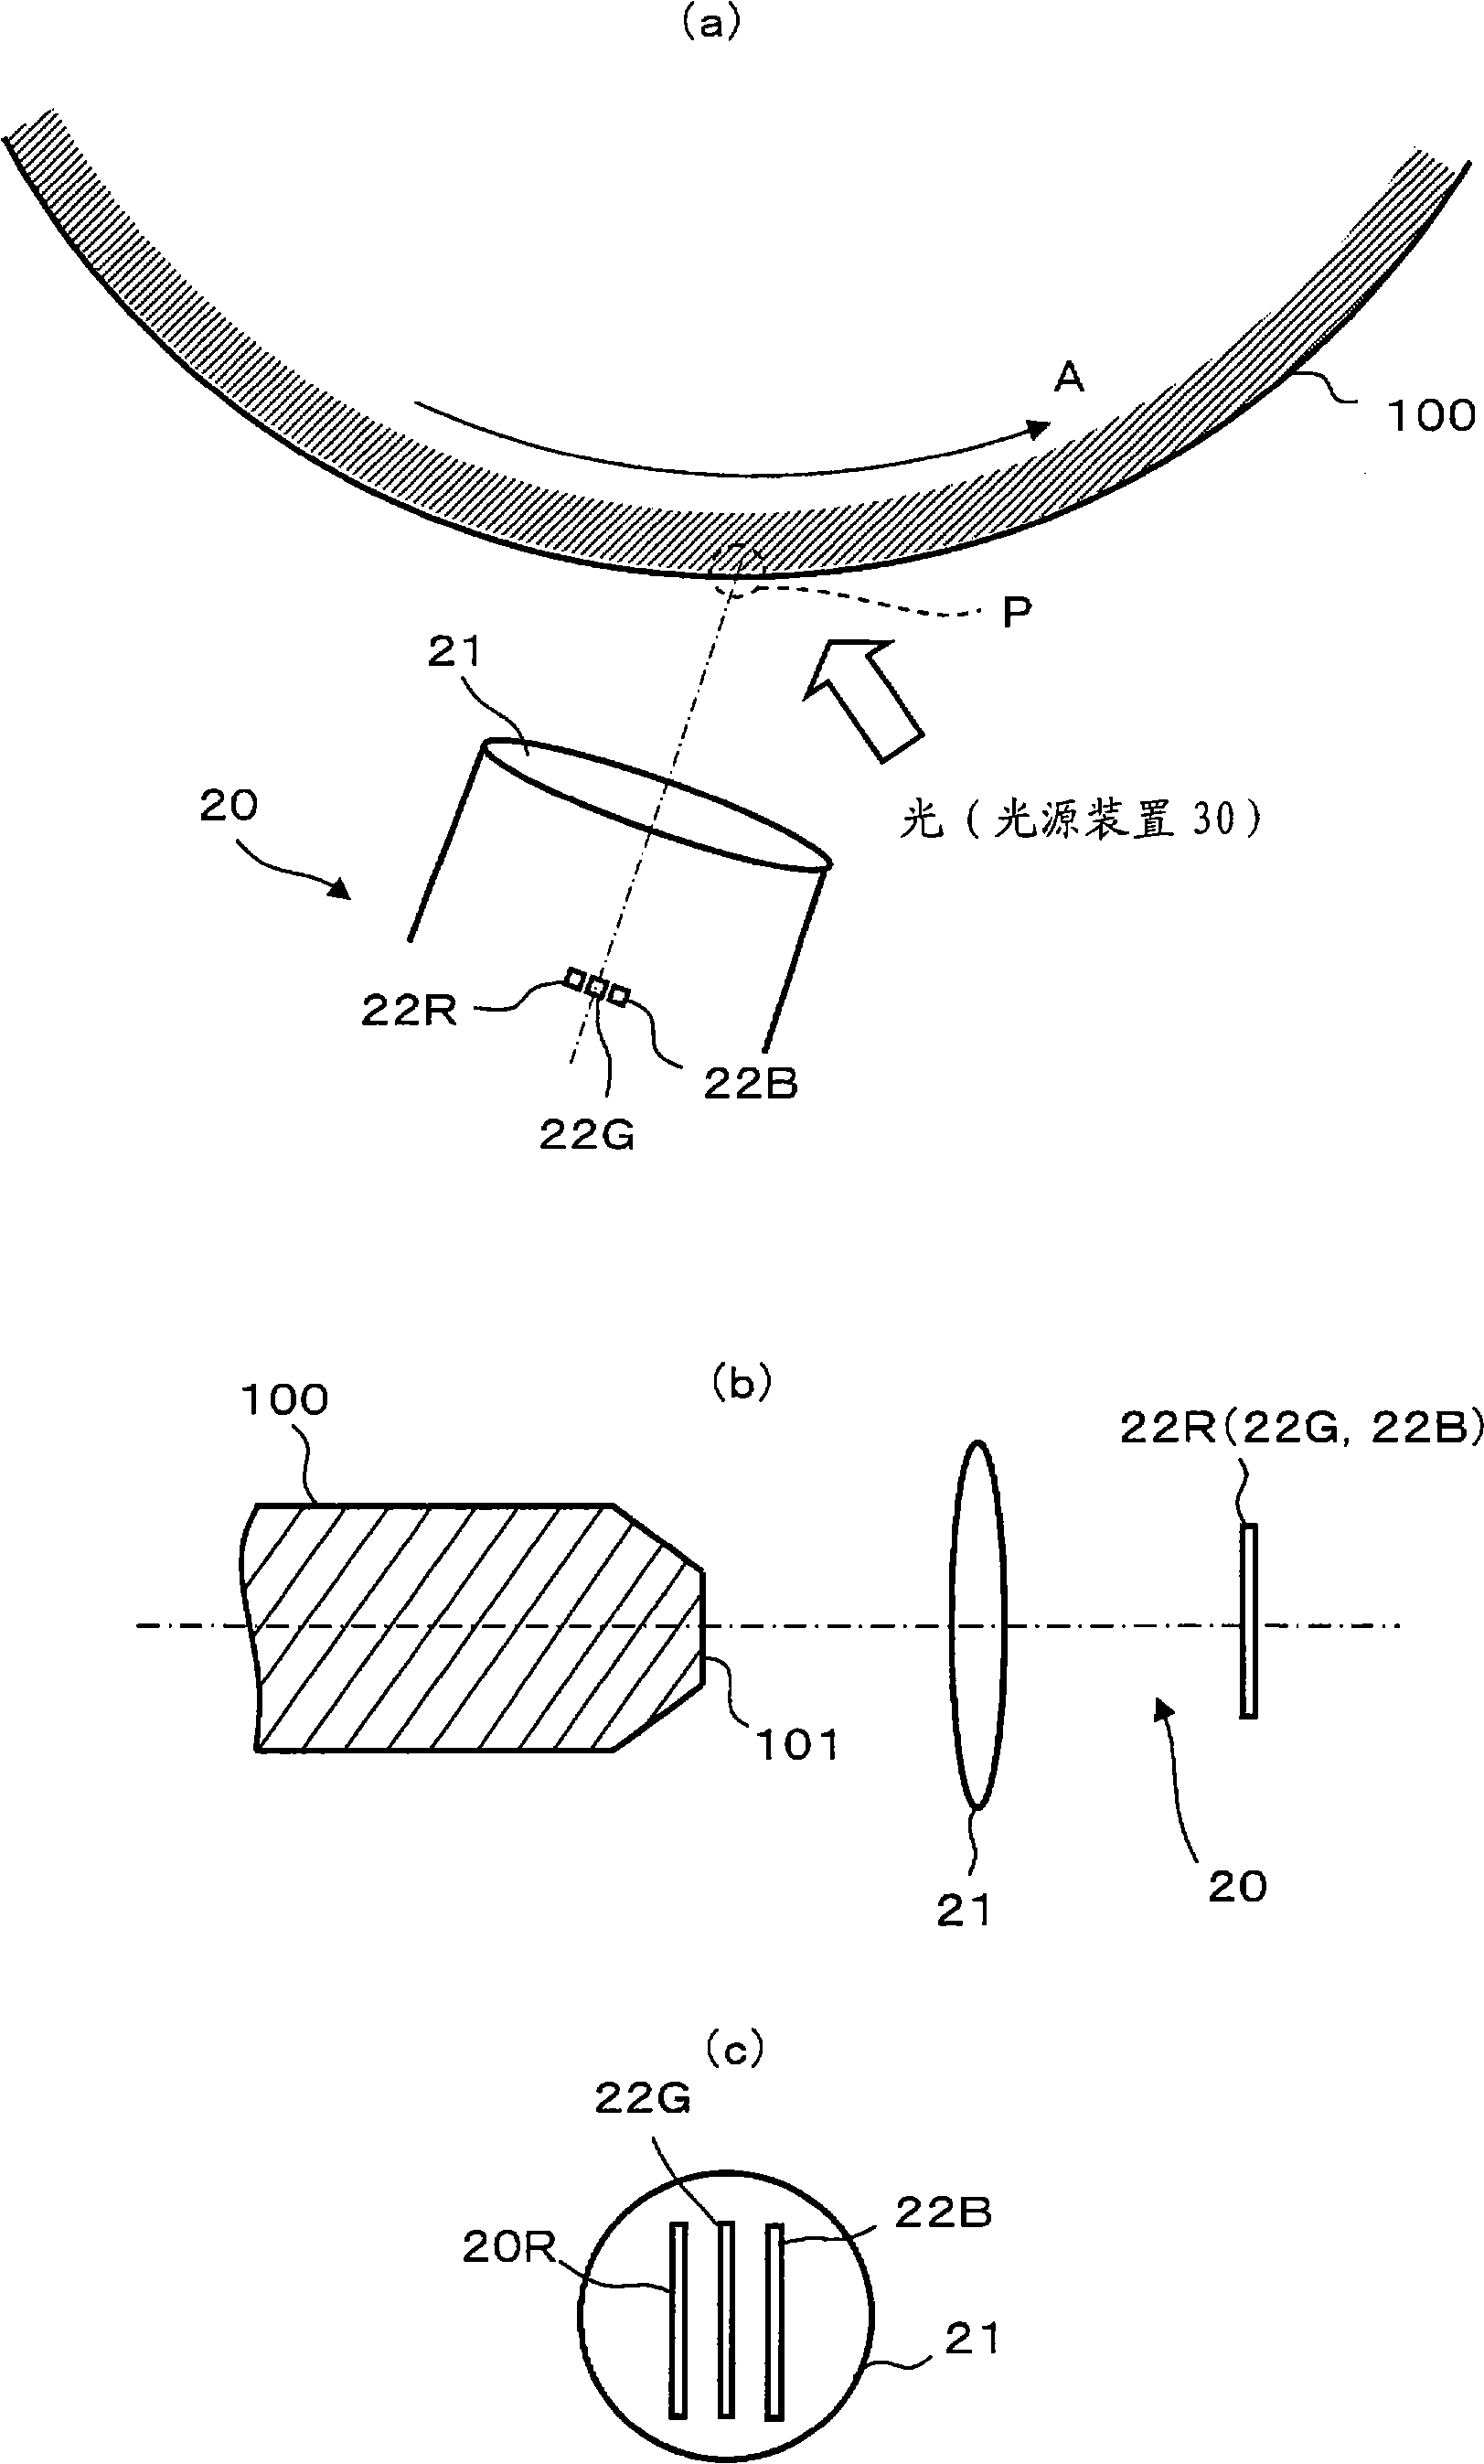 Appearance inspecting device